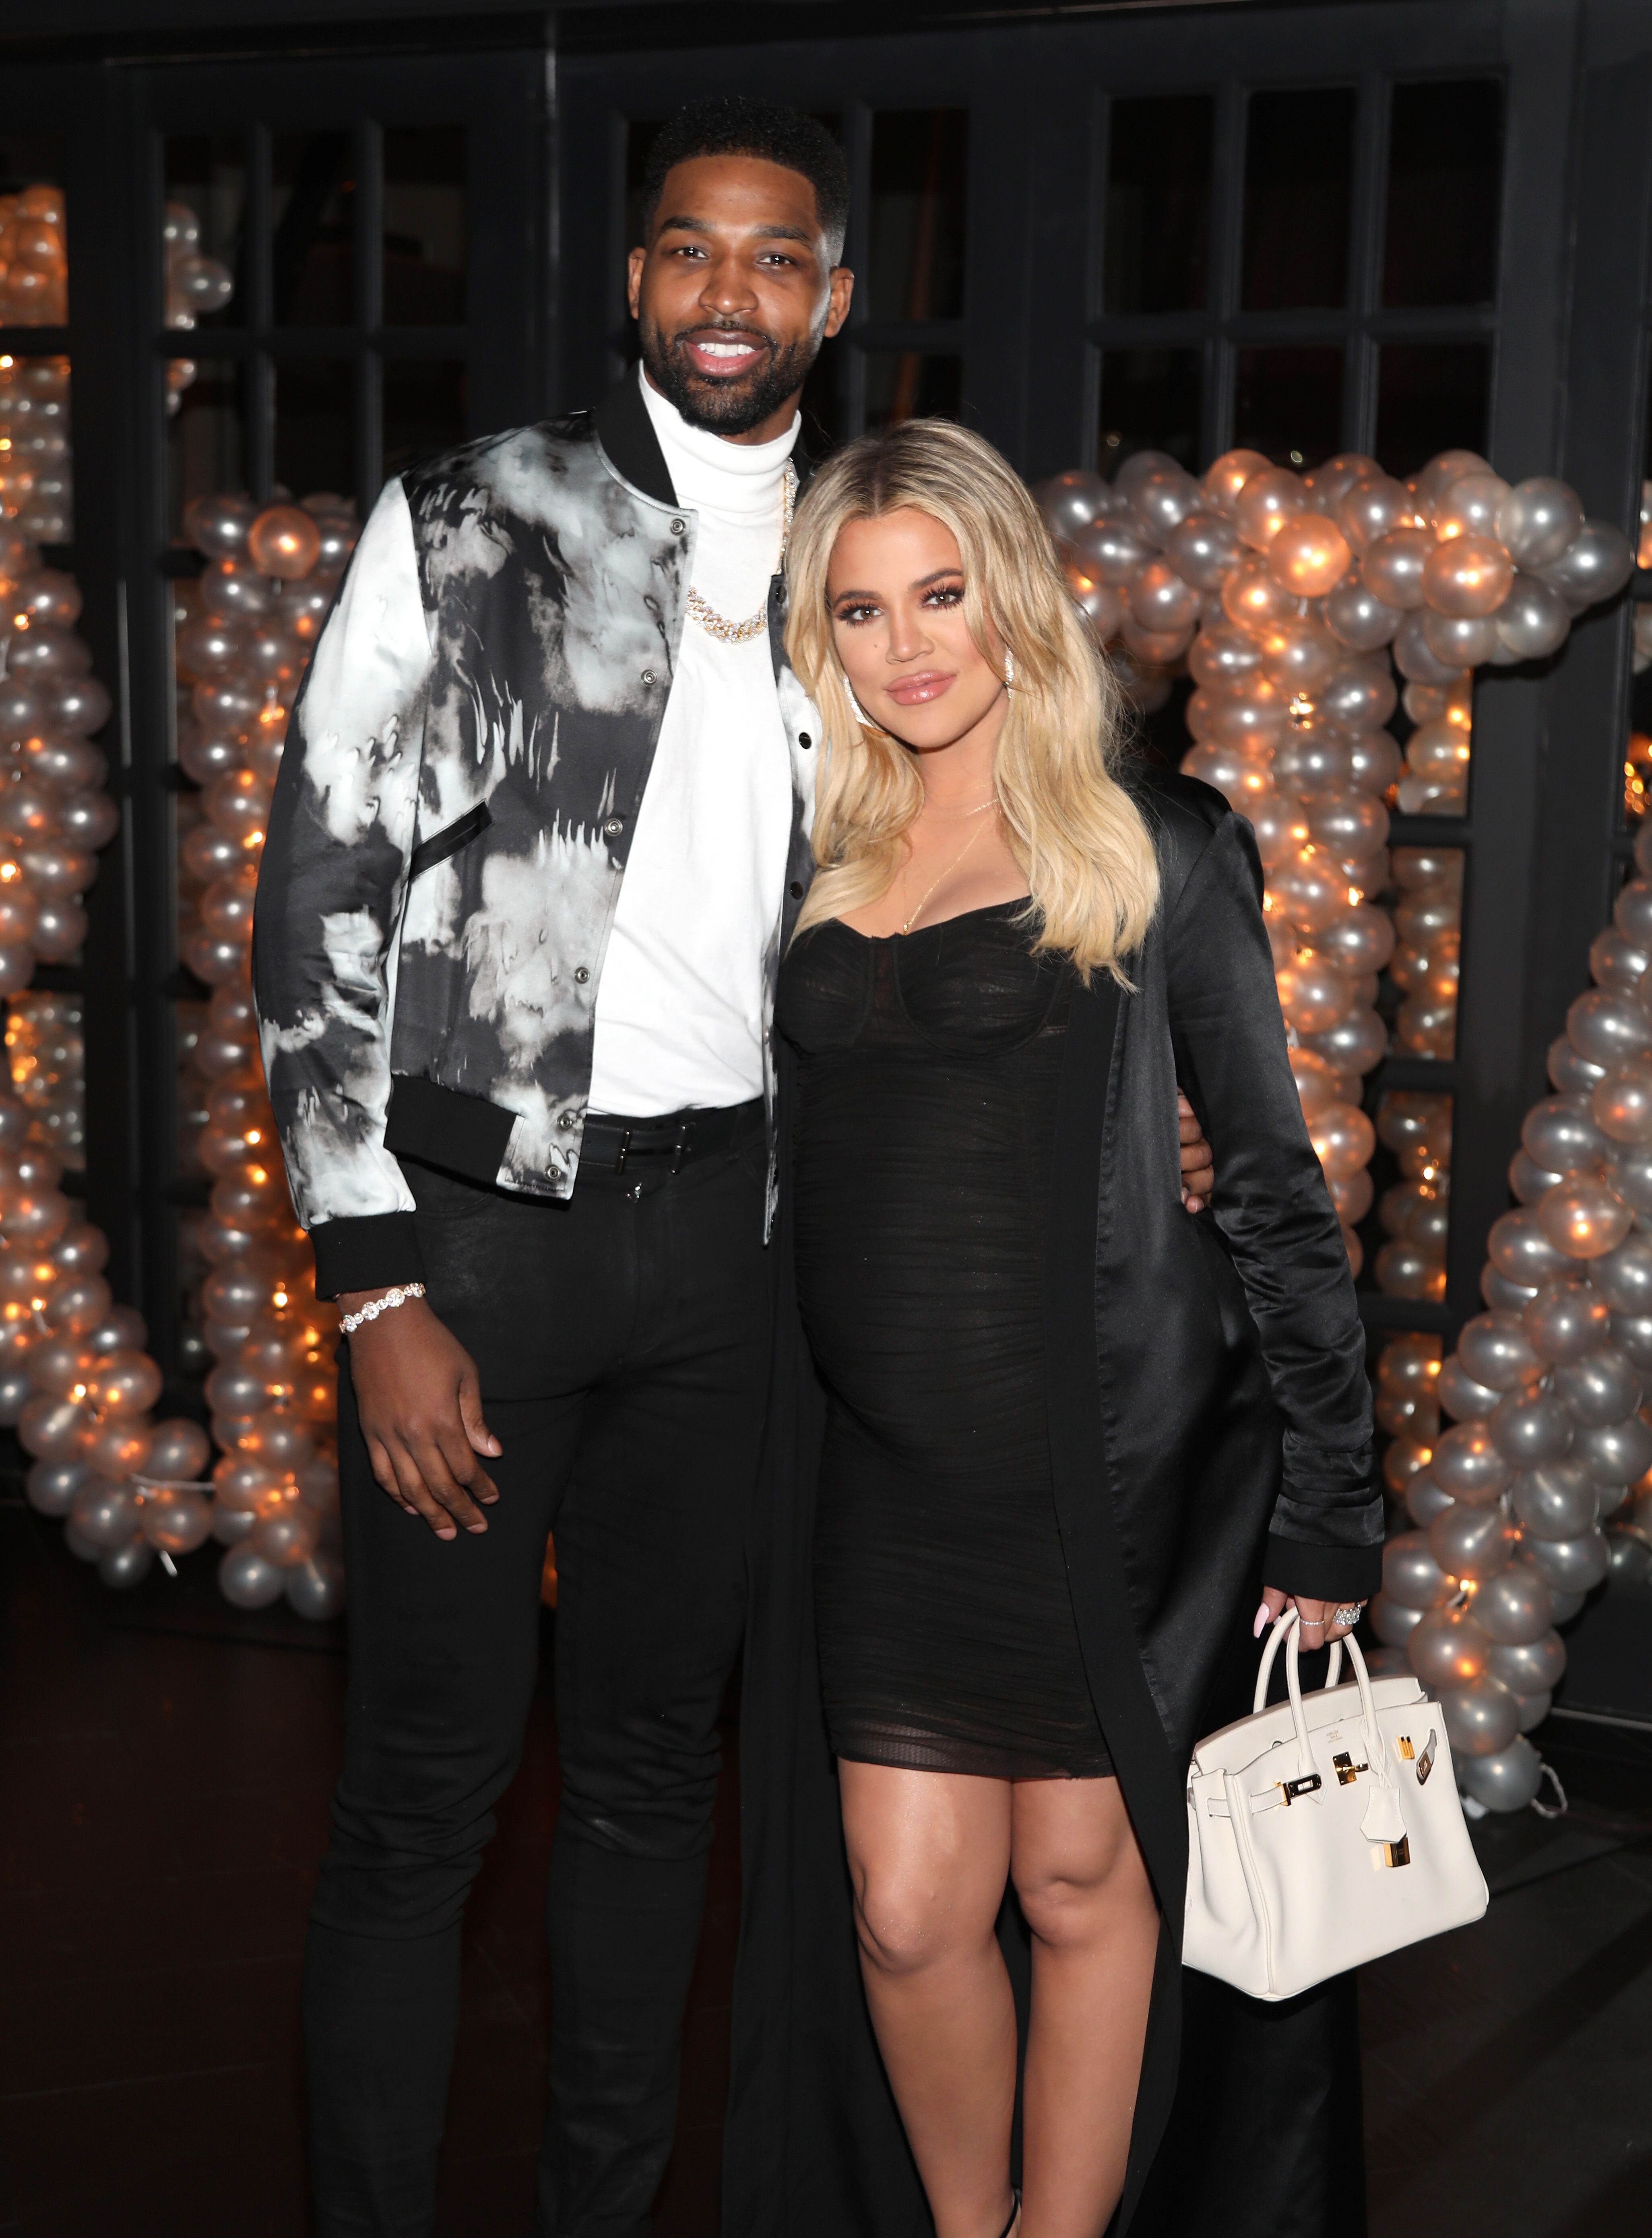 Tristan Thompson and Khloe Kardashian celebrate his birthday at Beauty & Essex on March 10, 2018, in Los Angeles, California | Photo: Jerritt Clark/Getty Images